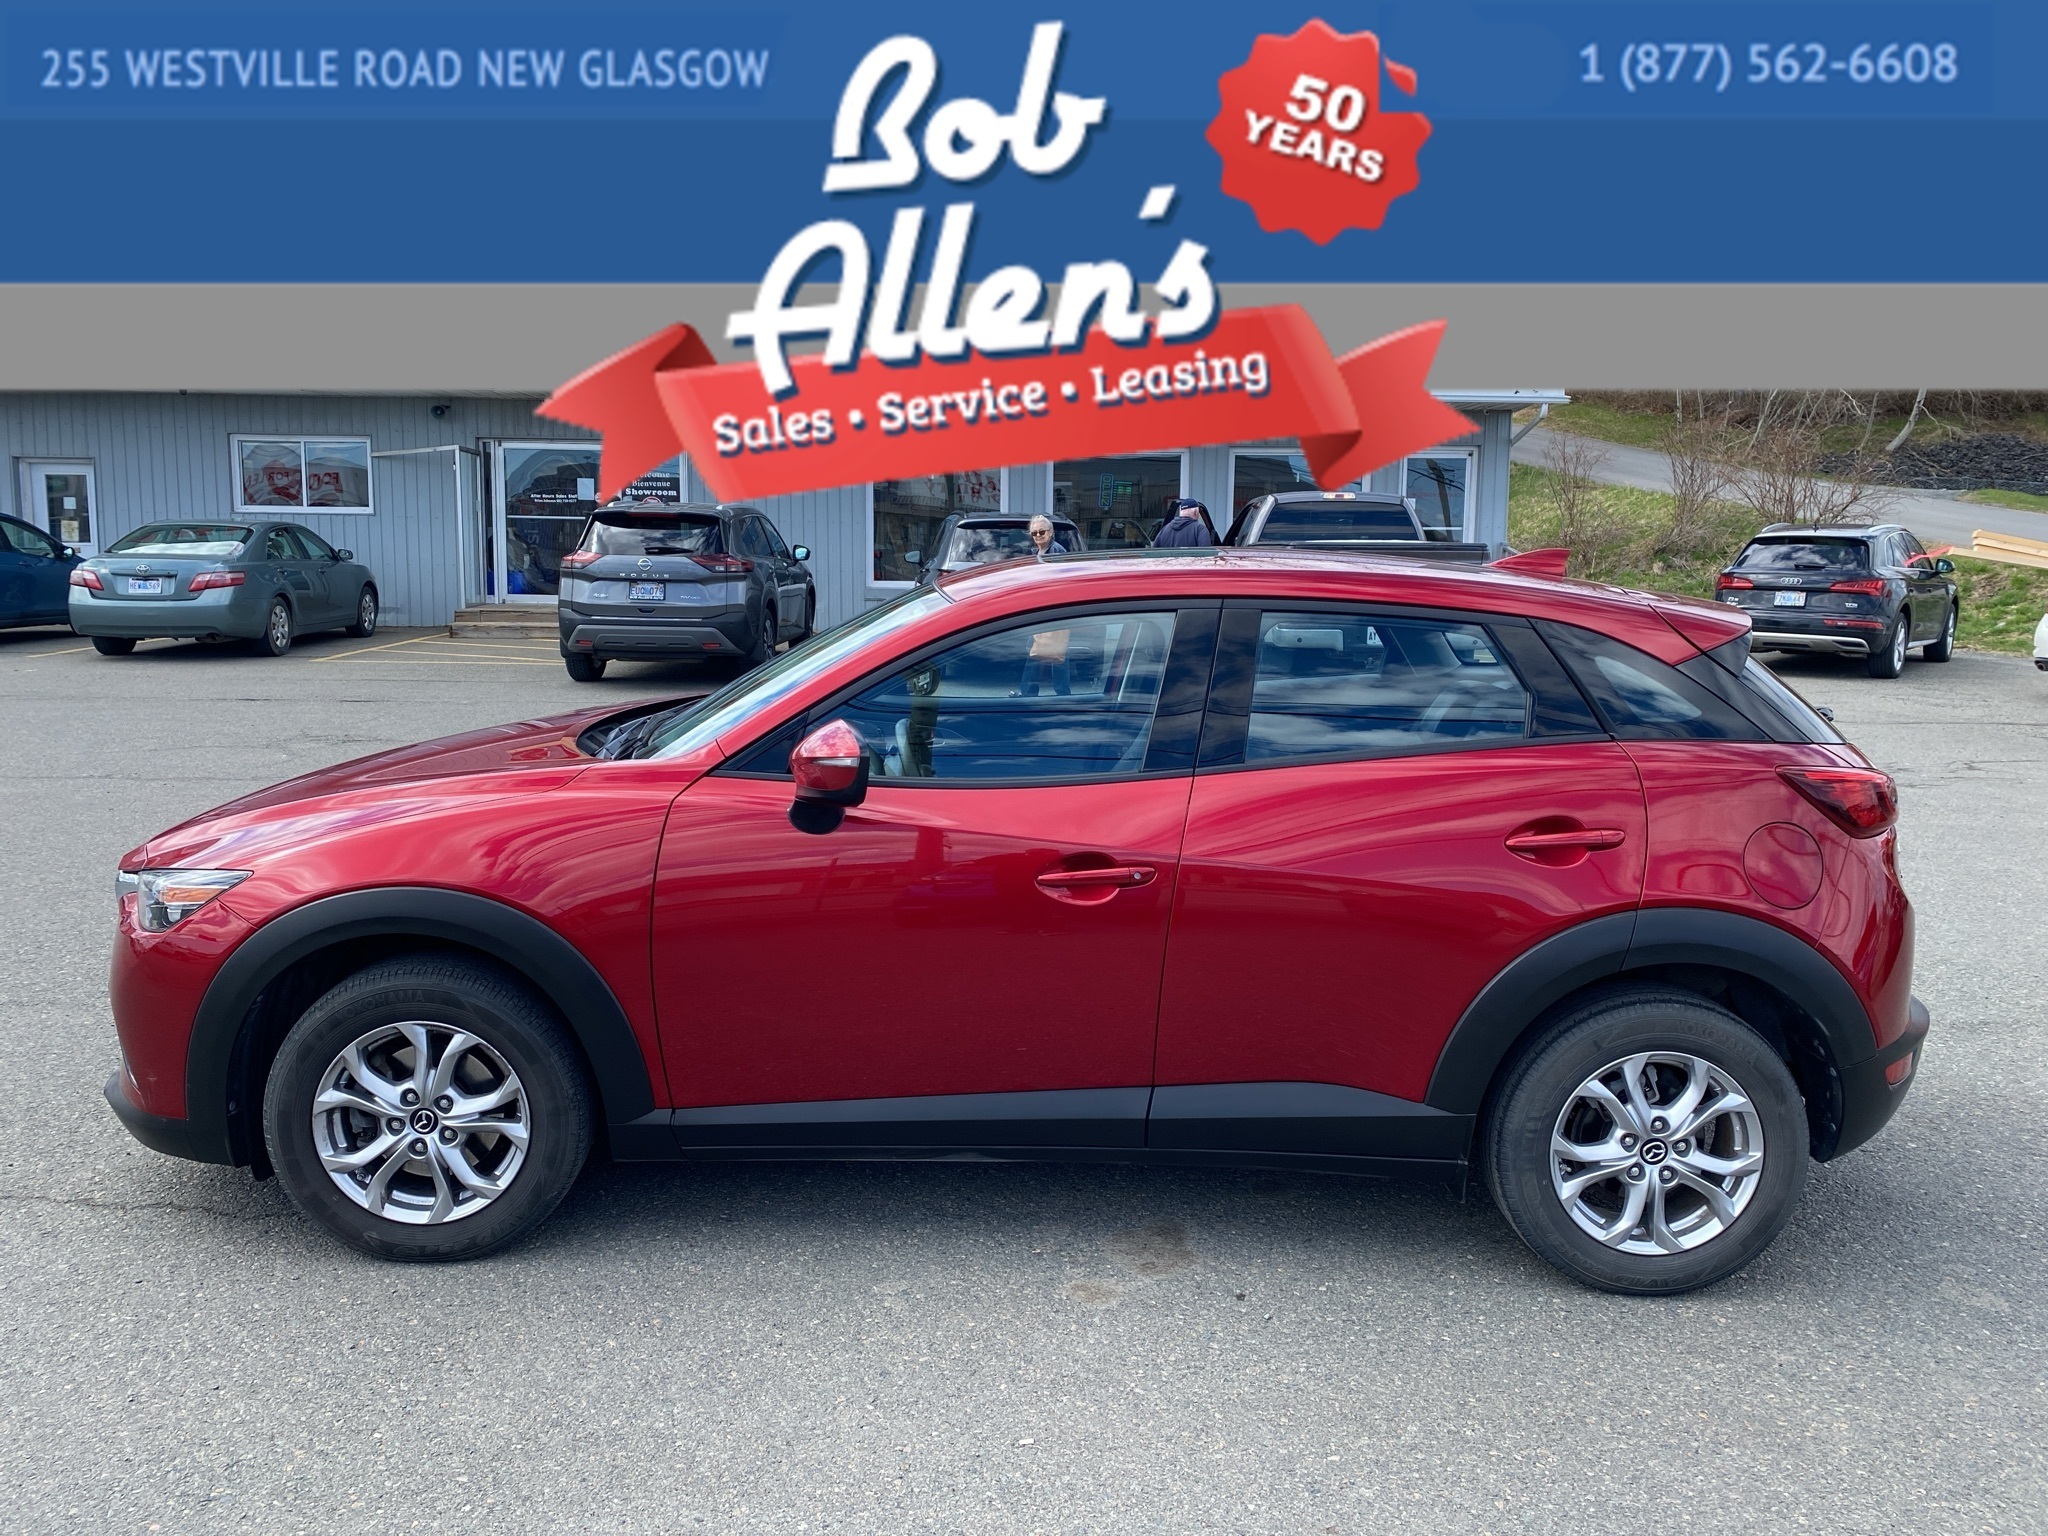 2019 Mazda CX-3 GS AWD LEATHER ROOF LOW KM 